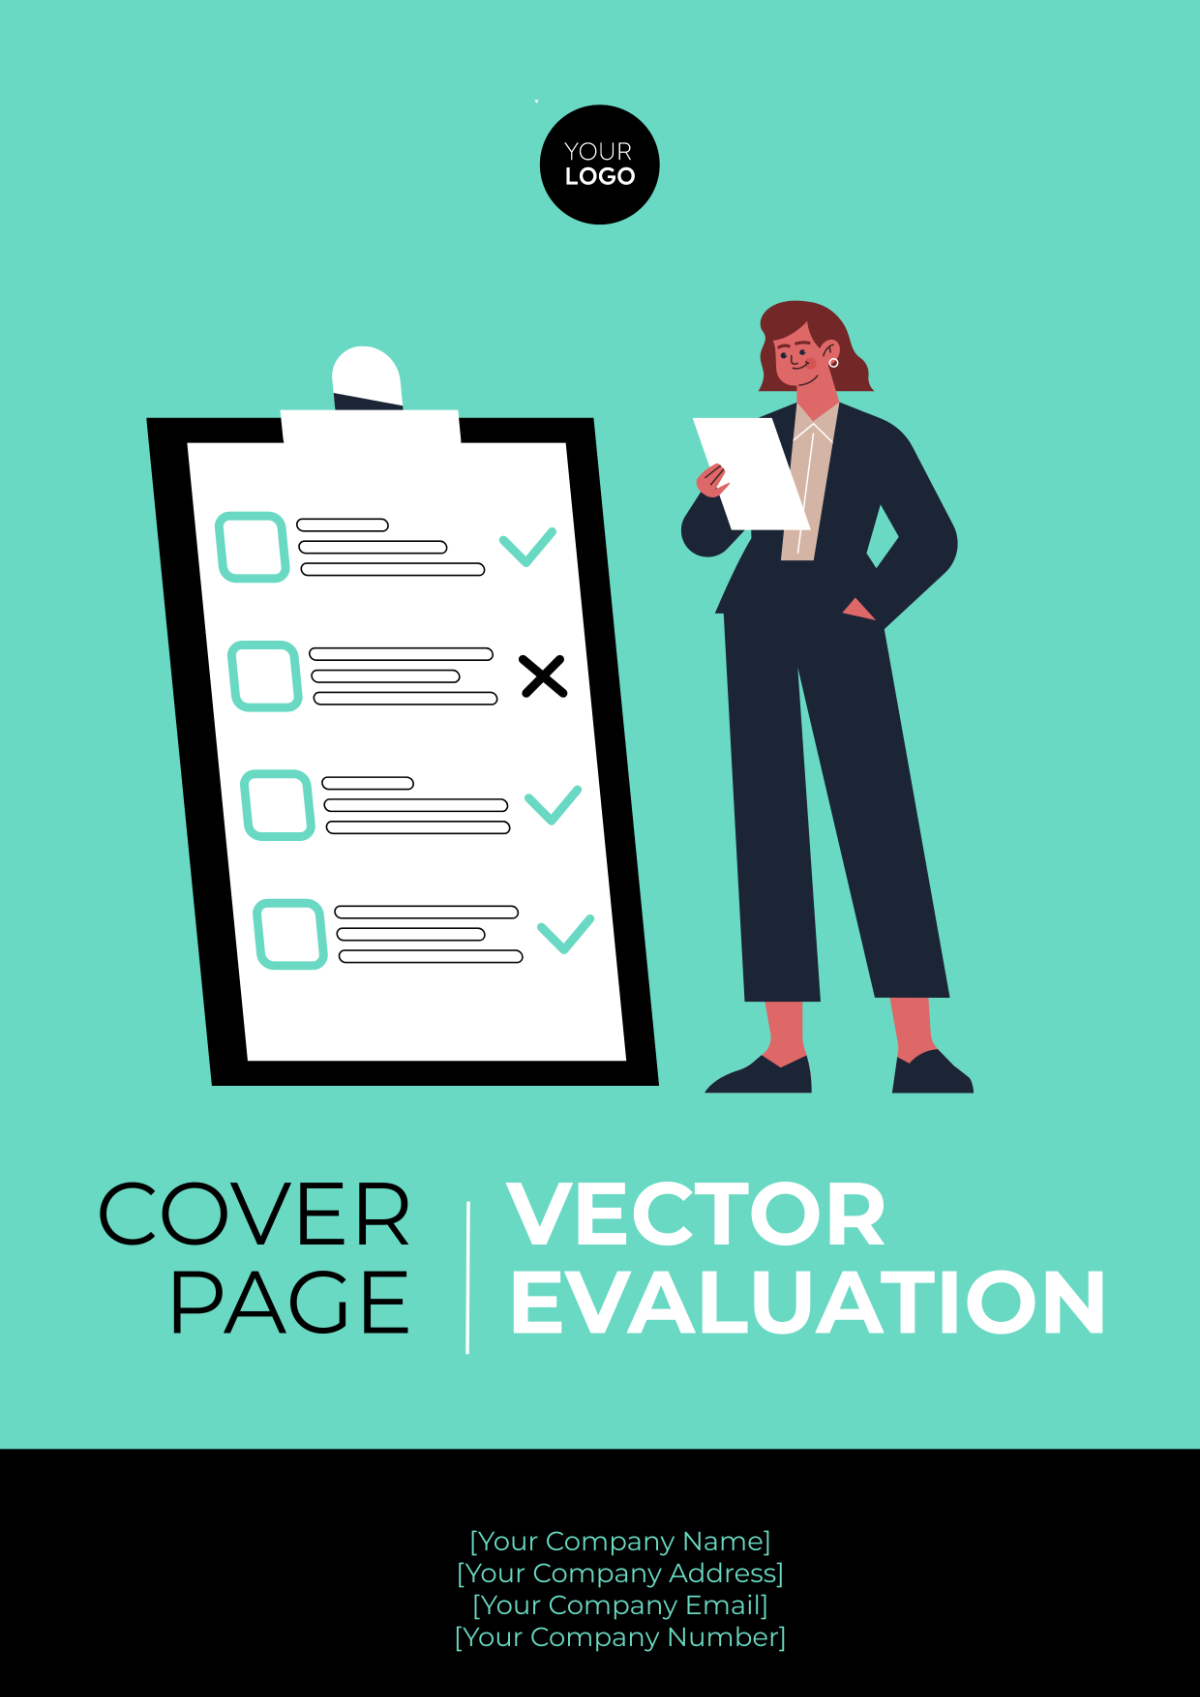 Vector Evaluation Cover Page